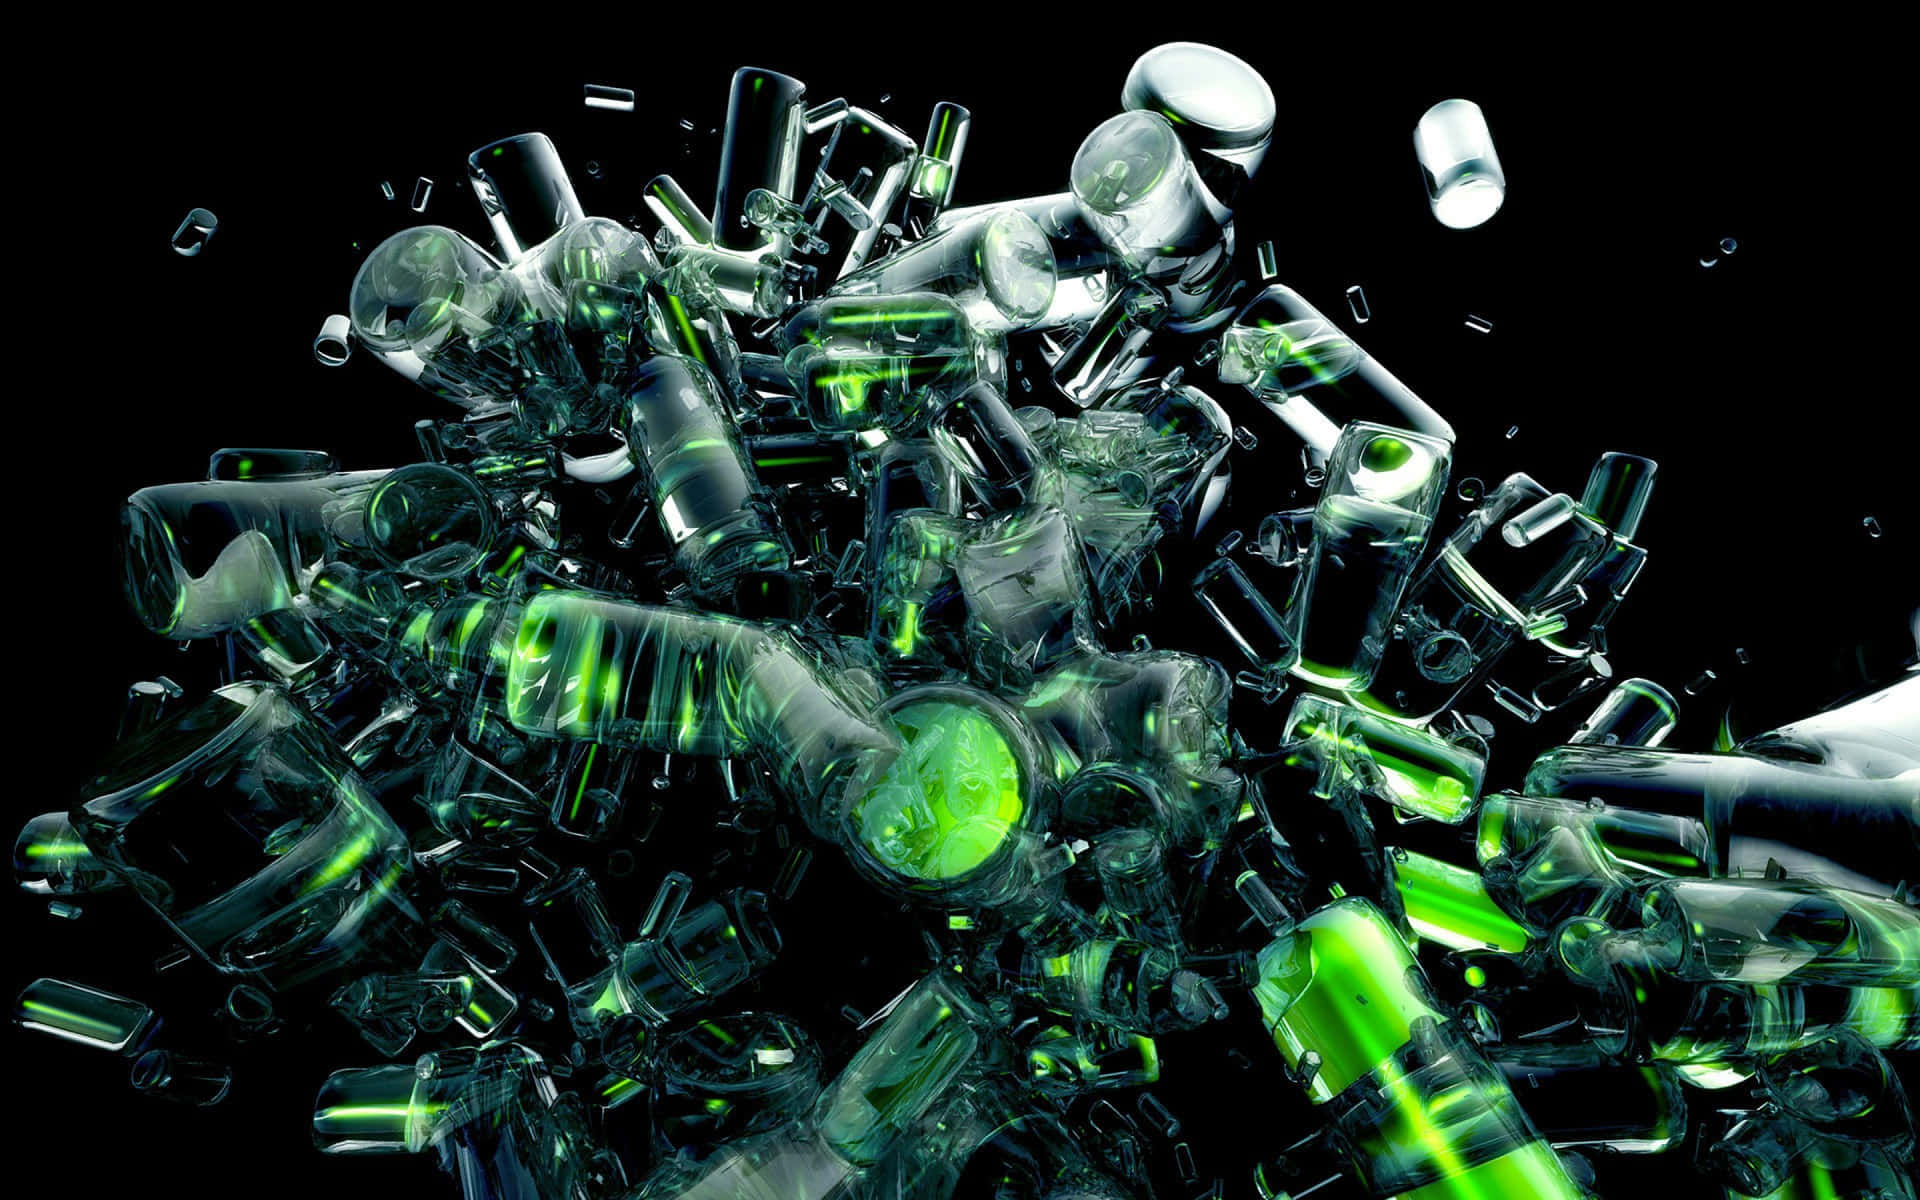 Green Glass Bottles Falling Down On A Black Background